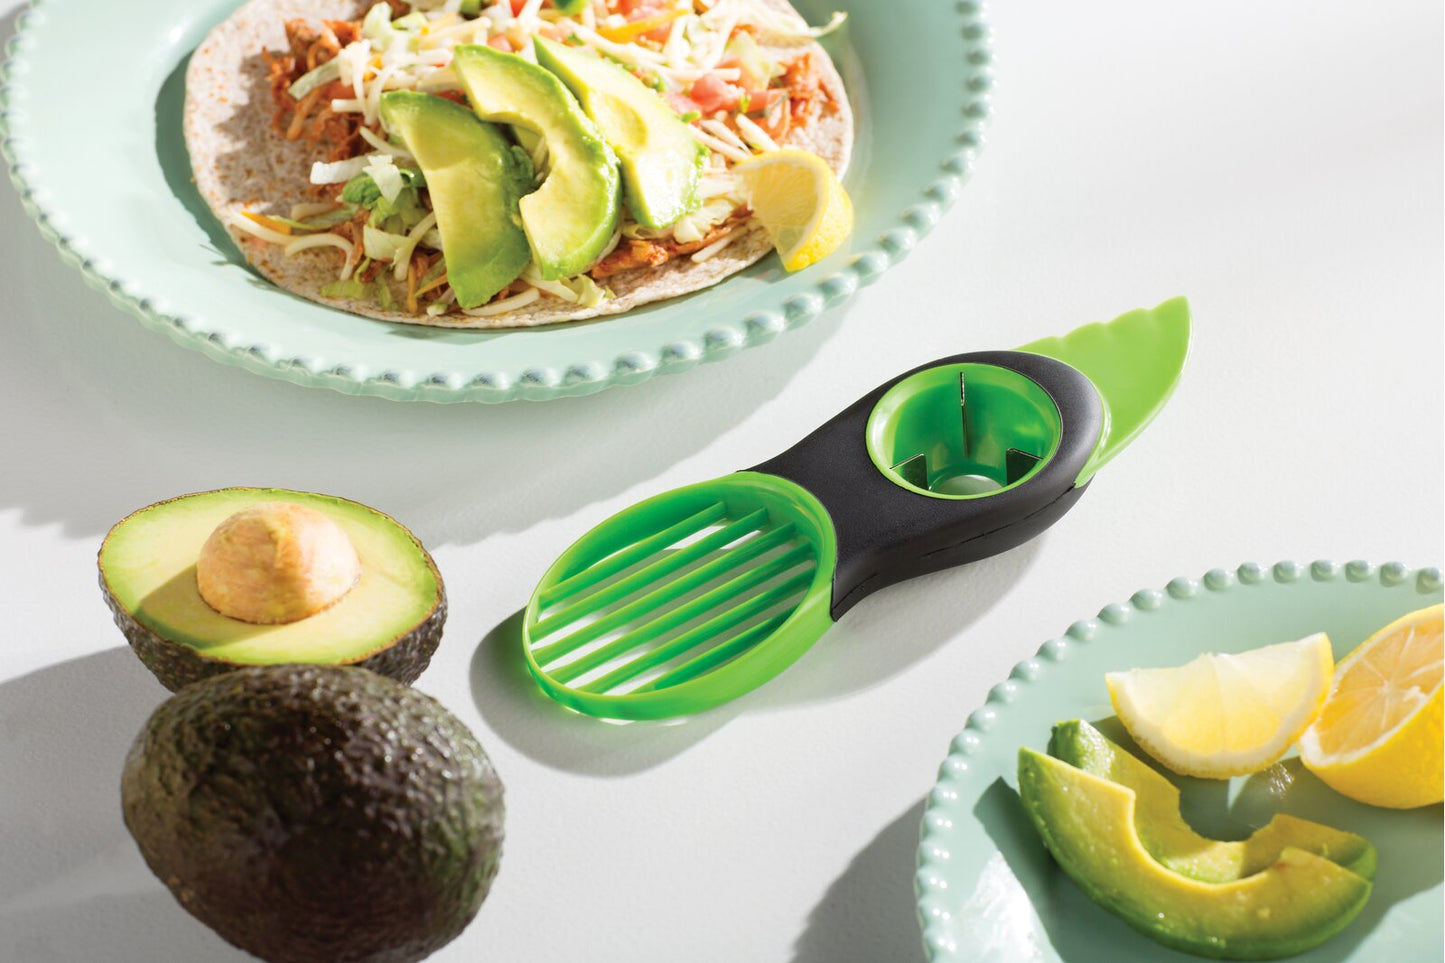 OXO 3-in-1 Avocado Slicer, green - Duluth Kitchen Co